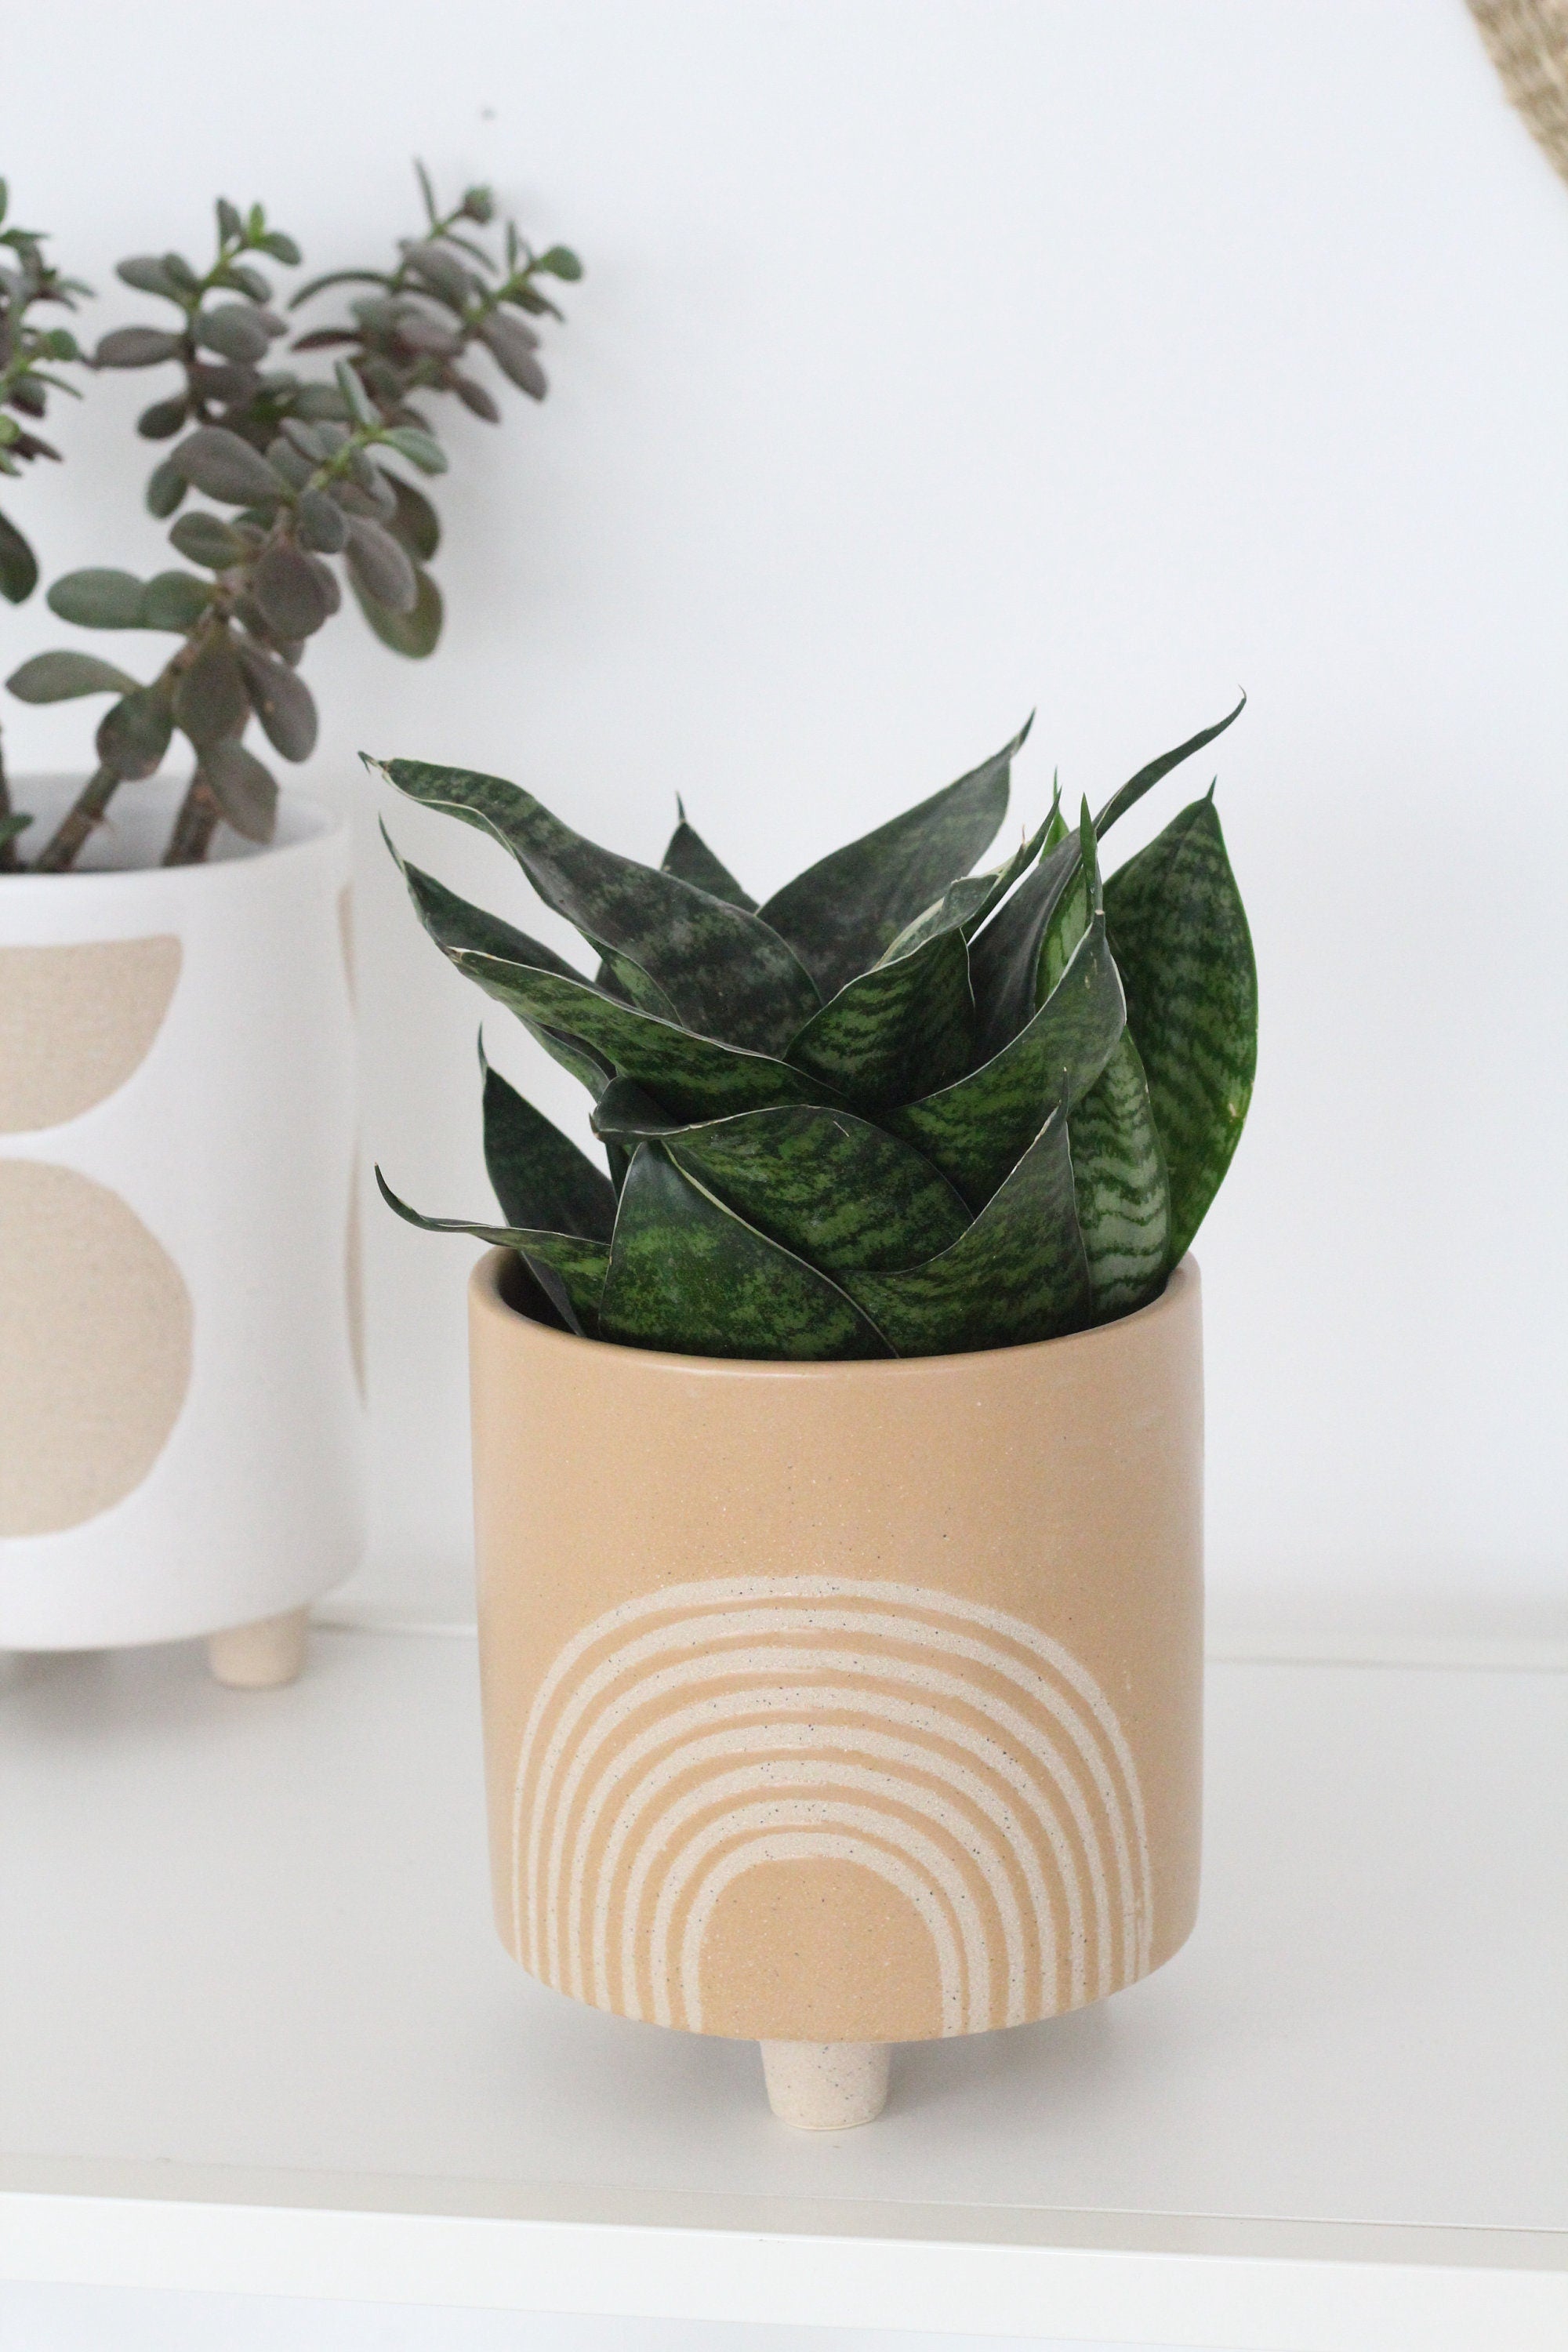 Beige Neutral Ceramic Planter Pot on Feet - Circle and Arch Emboss